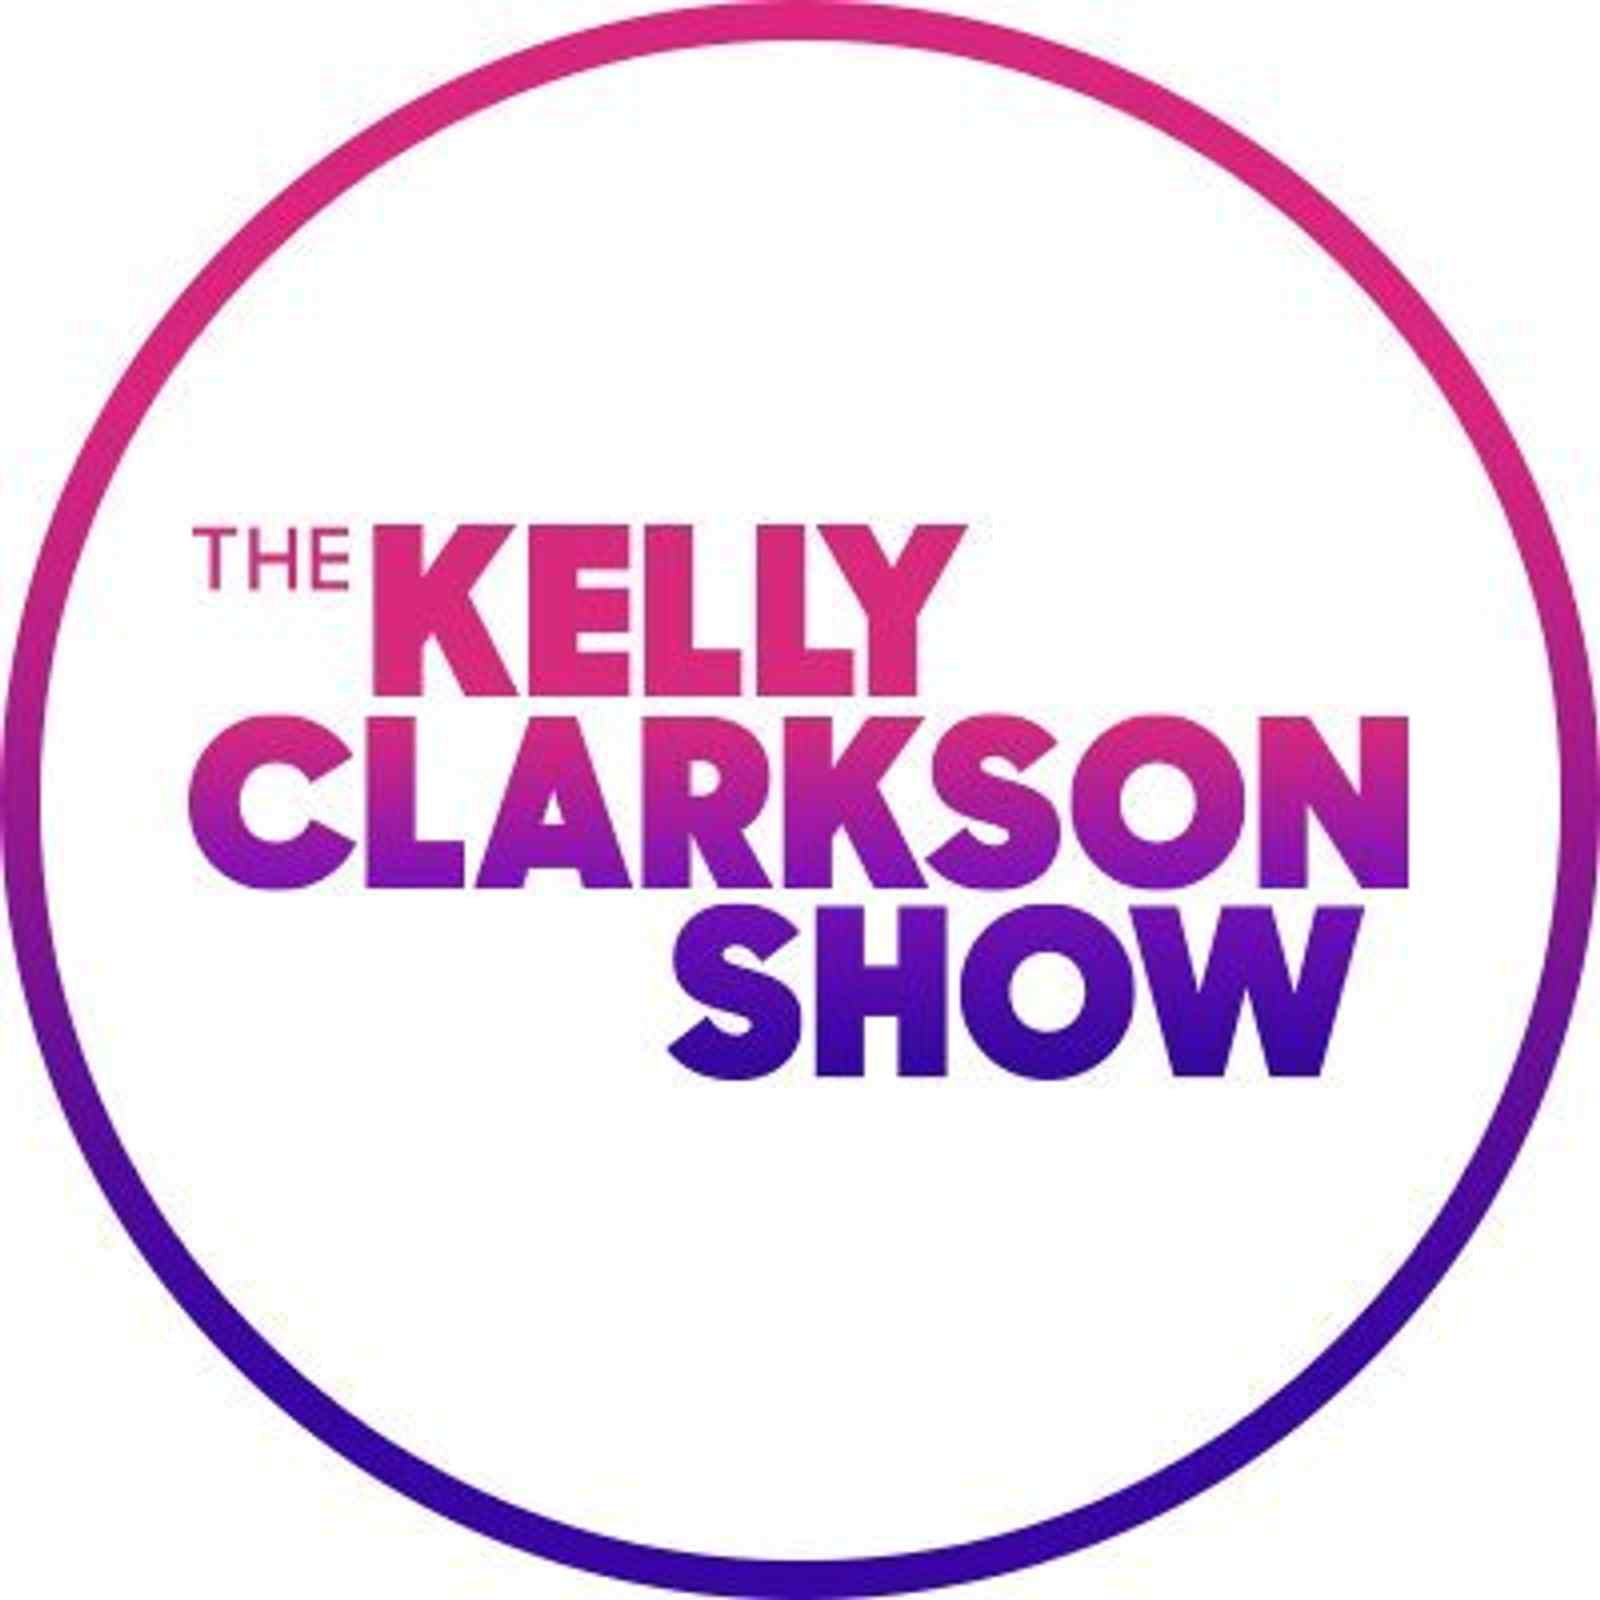 The Kelly Clarkson Show: Parmalee